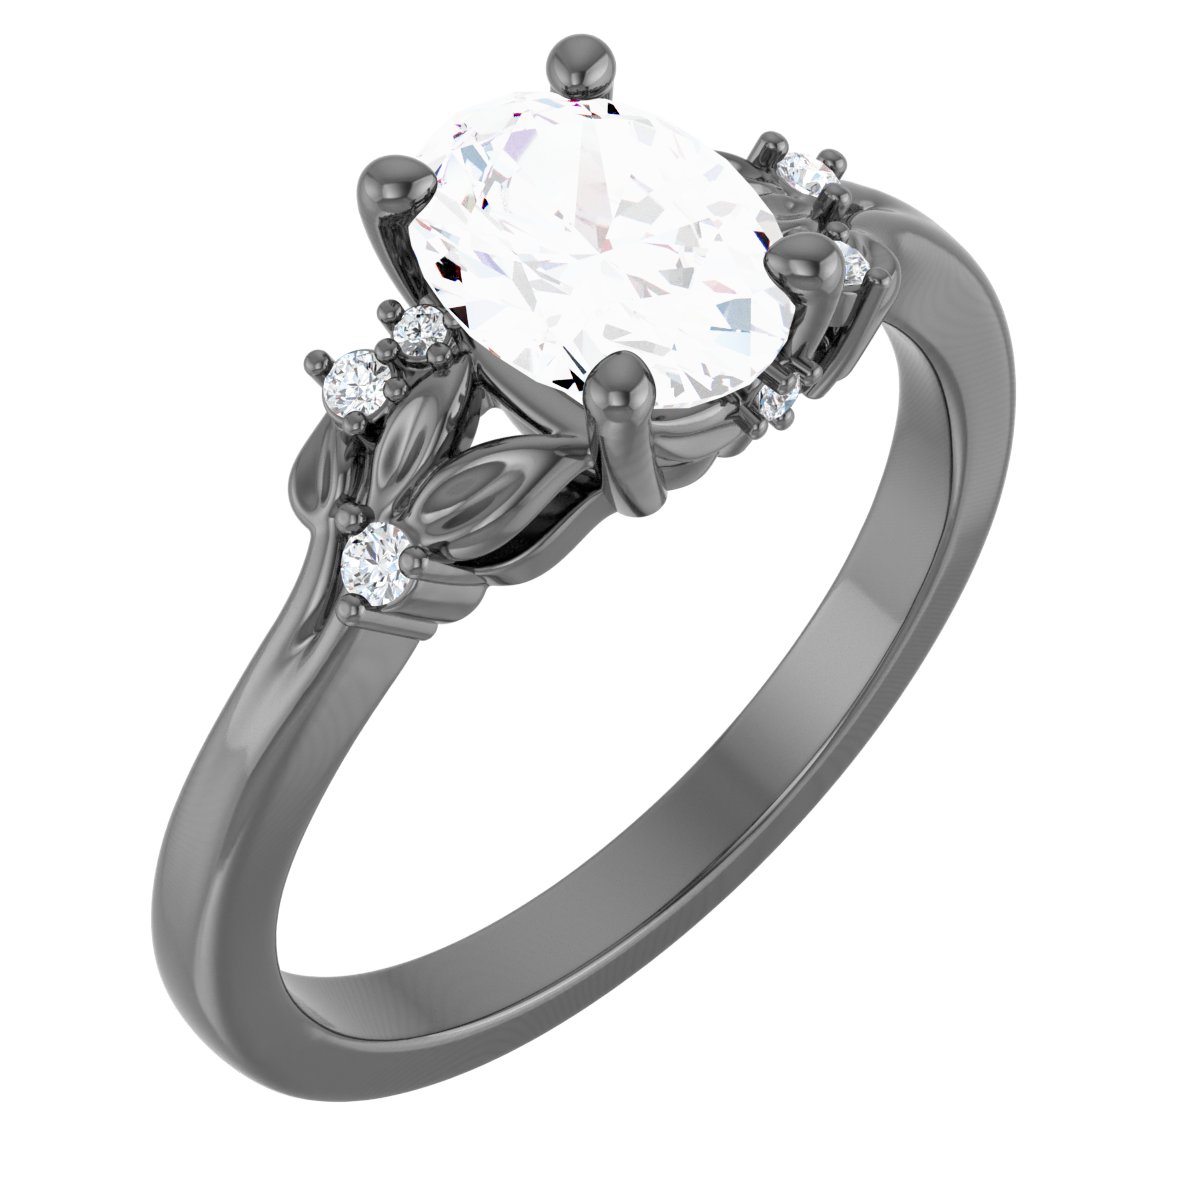 Floral-Inspired Engagement Ring or Band